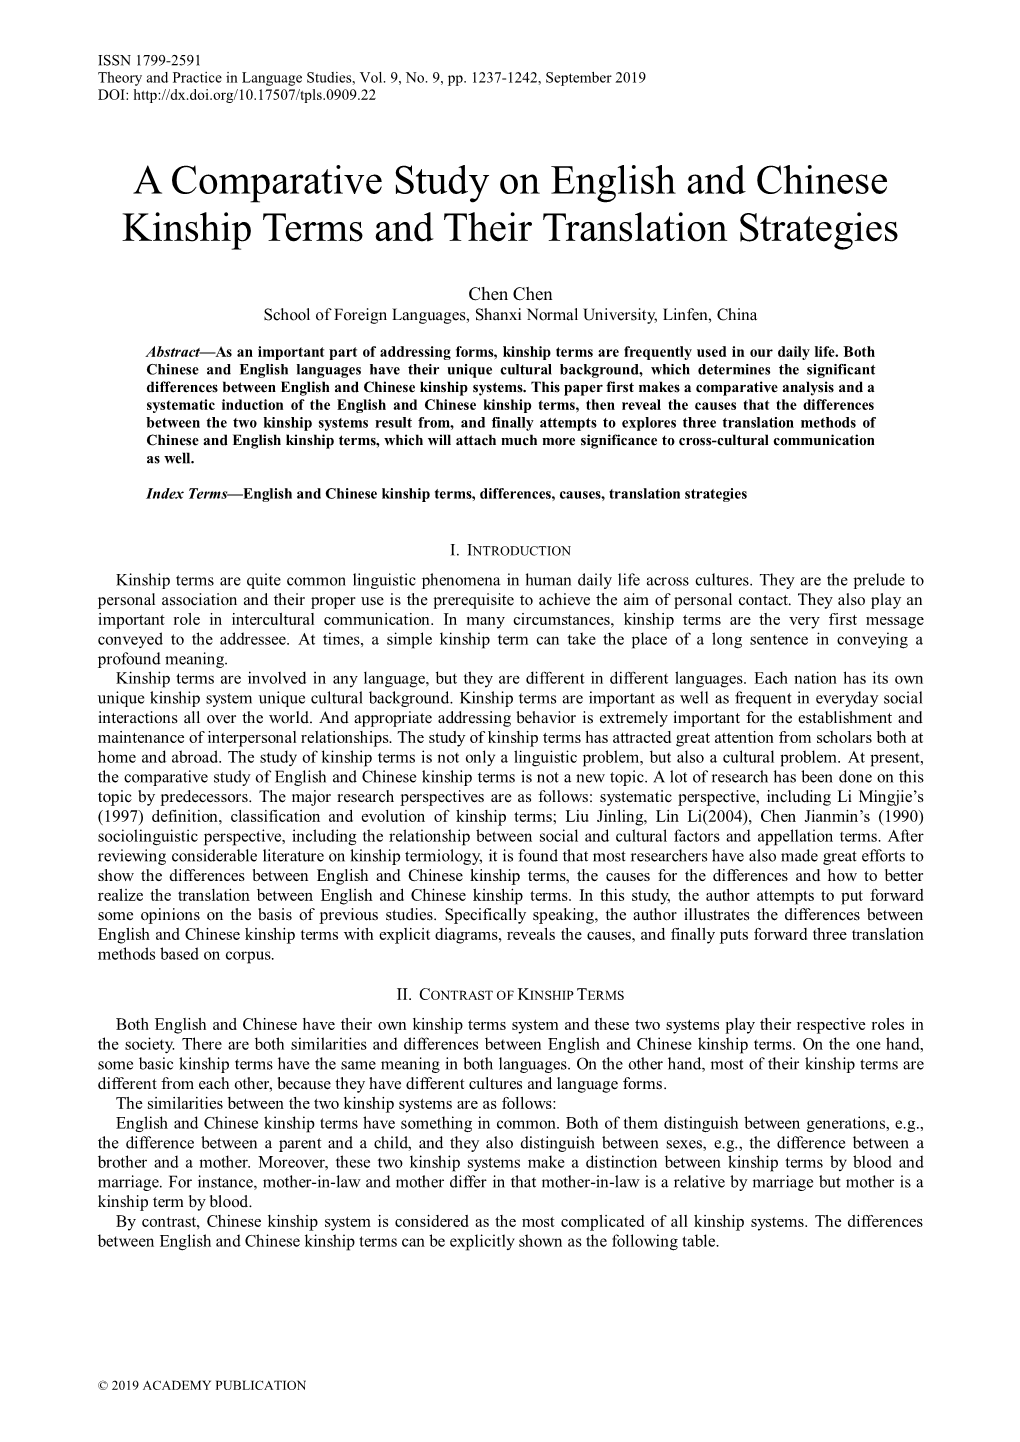 A Comparative Study on English and Chinese Kinship Terms and Their Translation Strategies